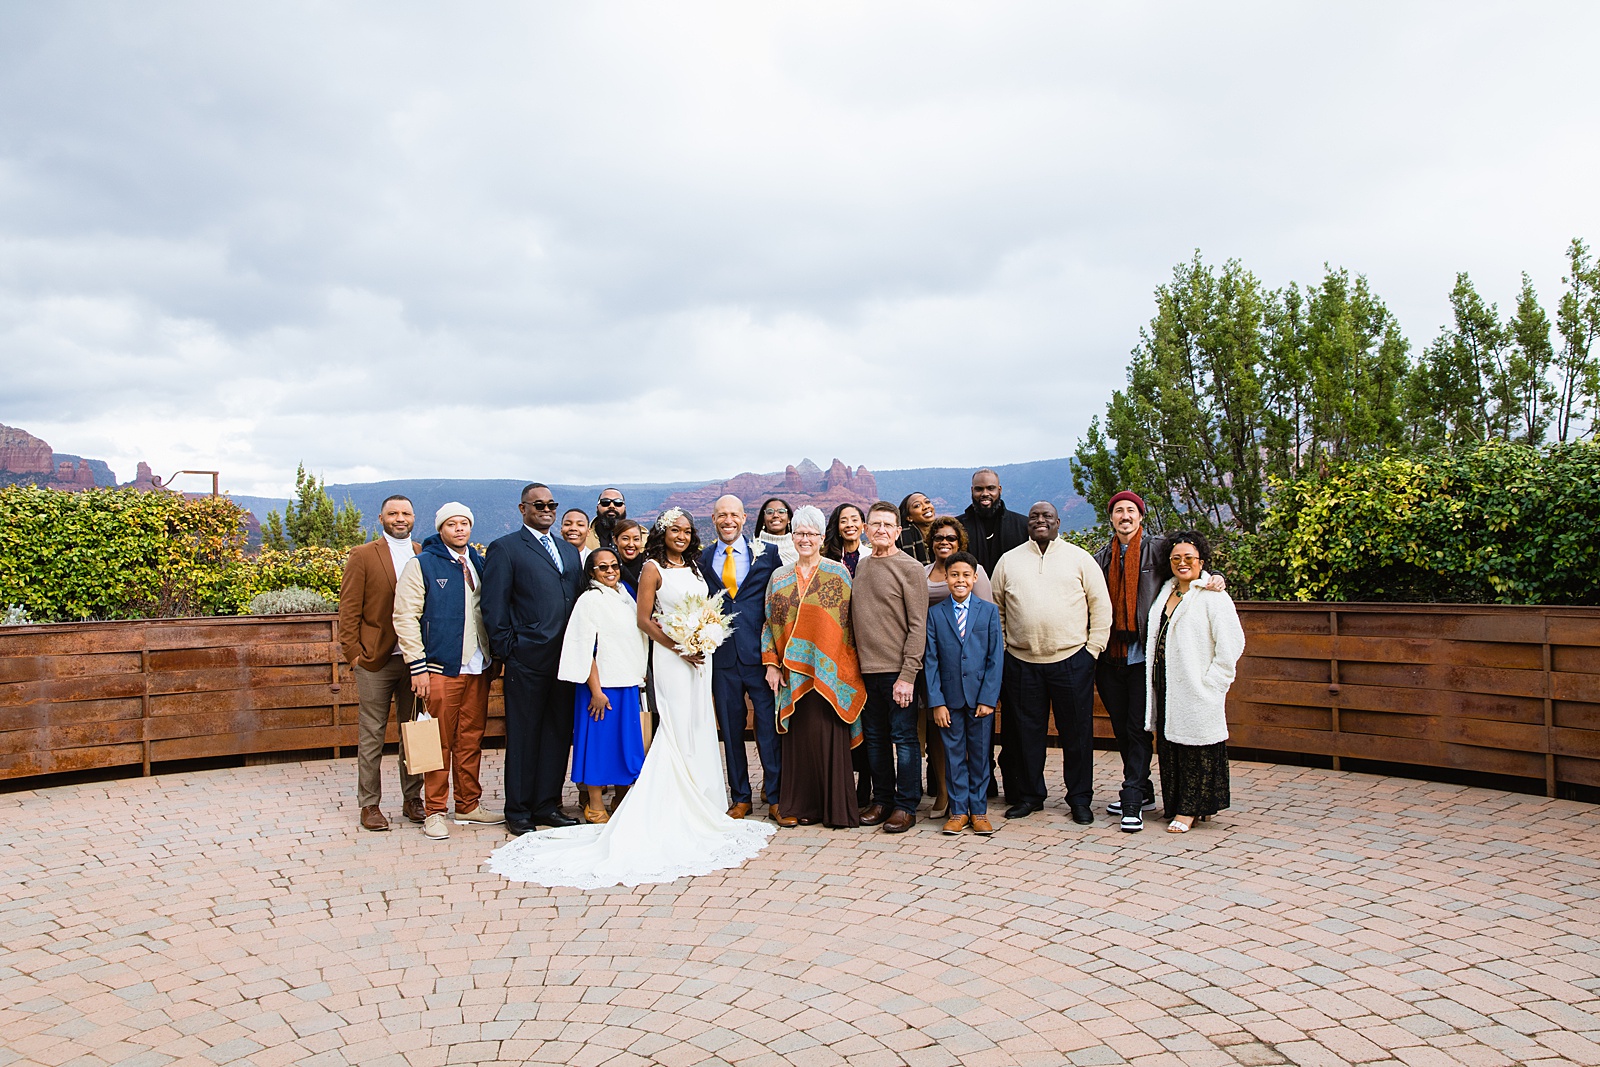 Newlywed couple with their family and guests at their Agave of Sedona micro wedding by Arizona wedding photographer PMA Photography.